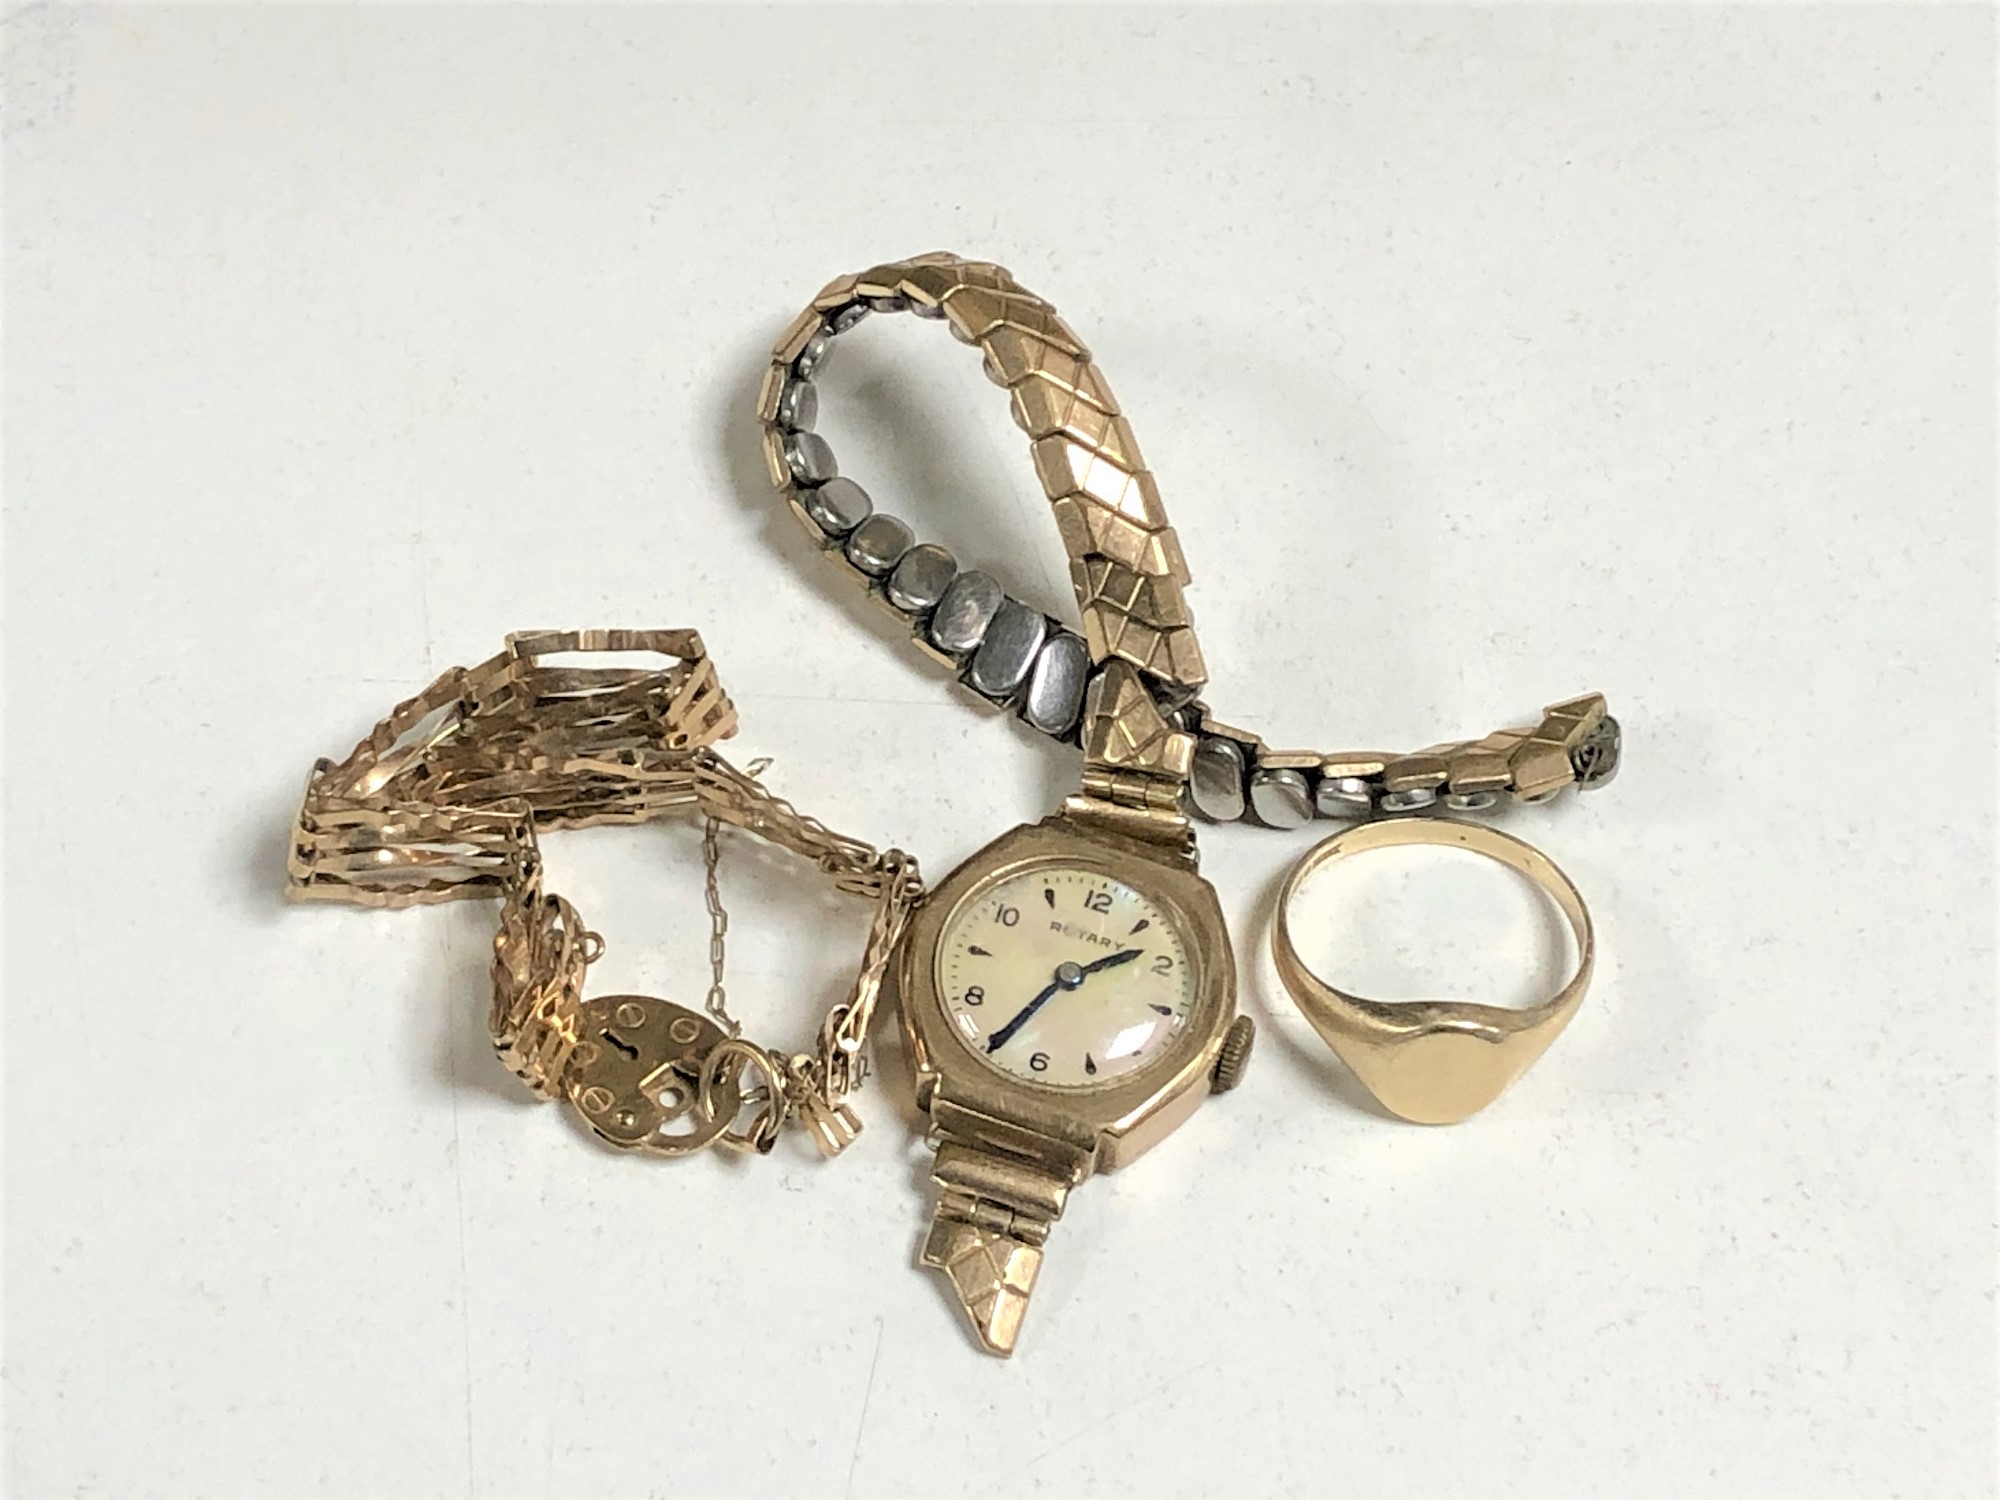 A 9ct gold gate bracelet (4.3g), together with a 9ct gold signet ring (2.